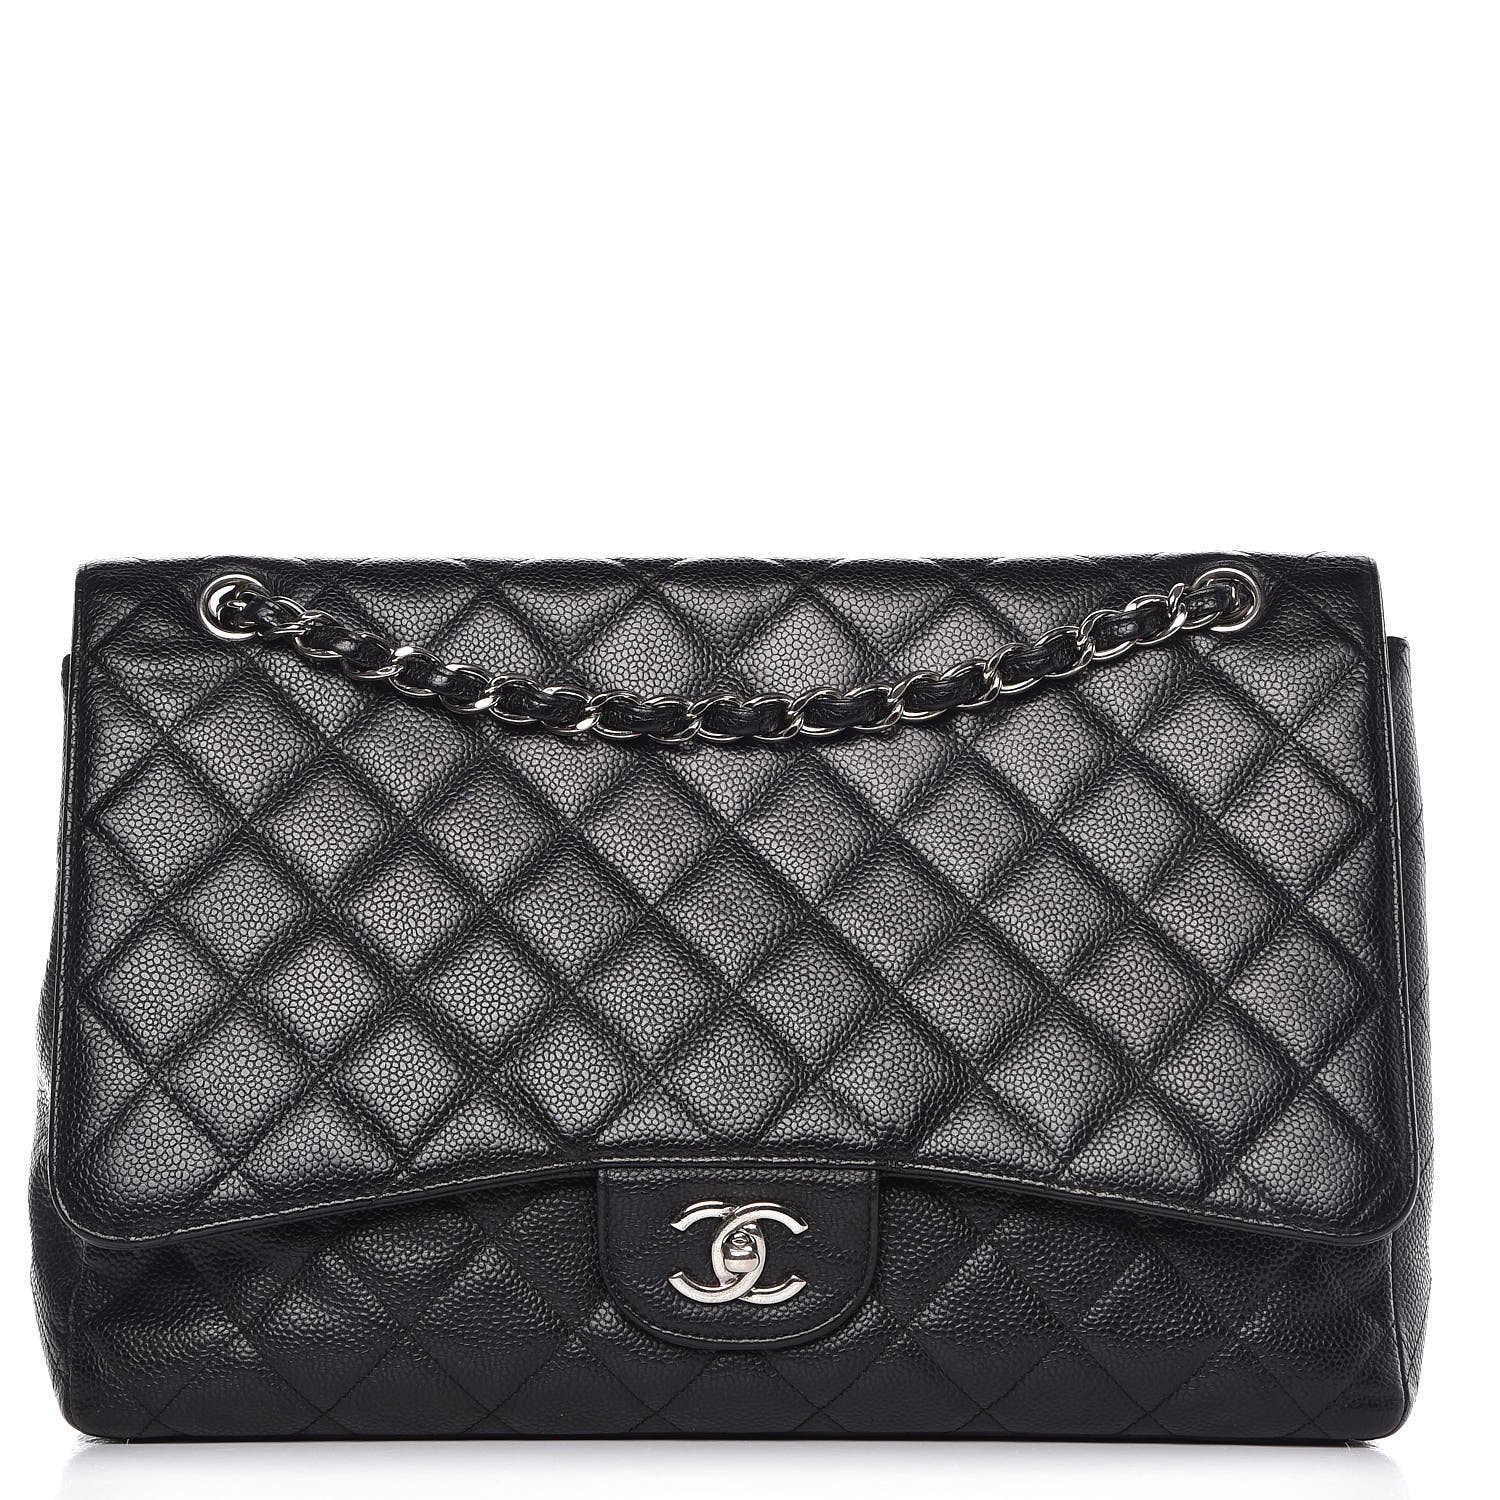 CHANEL Caviar Quilted Maxi Single Flap Black 284529